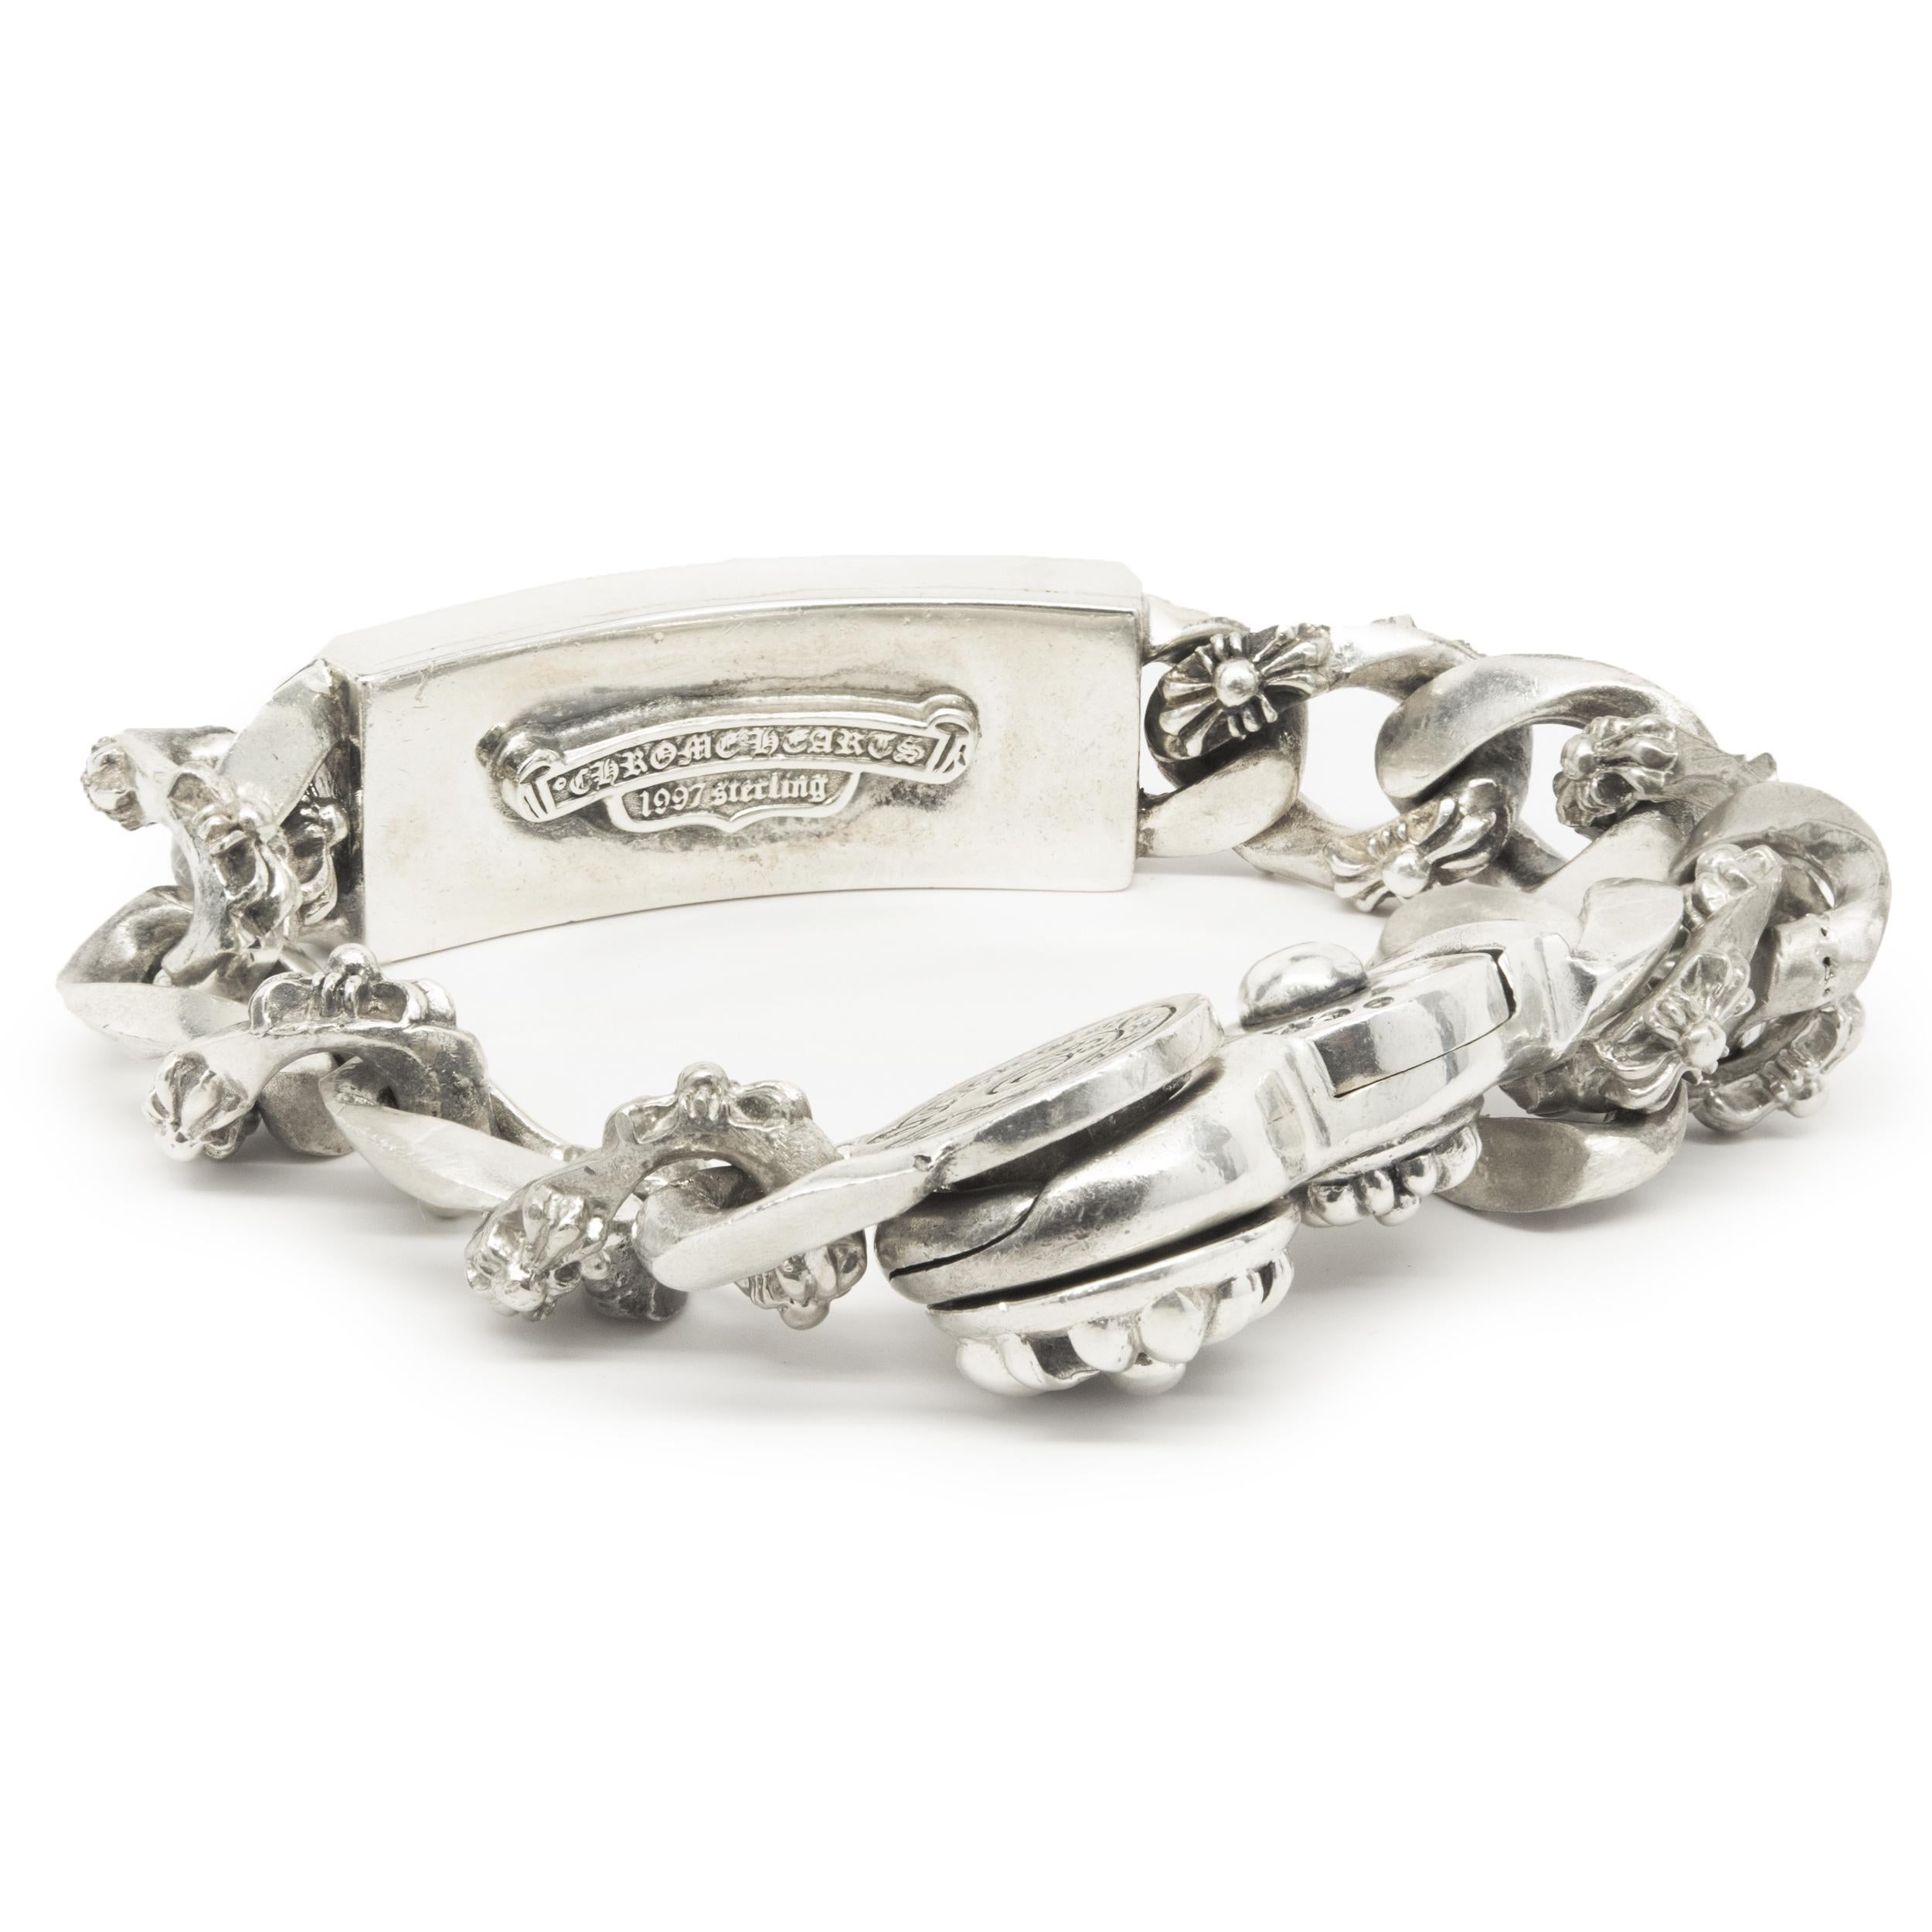 Designer:  Chrome Hearts
Material: sterling silver
Weight: 145.30 grams
Dimensions: bracelet measures 10-inches in length
